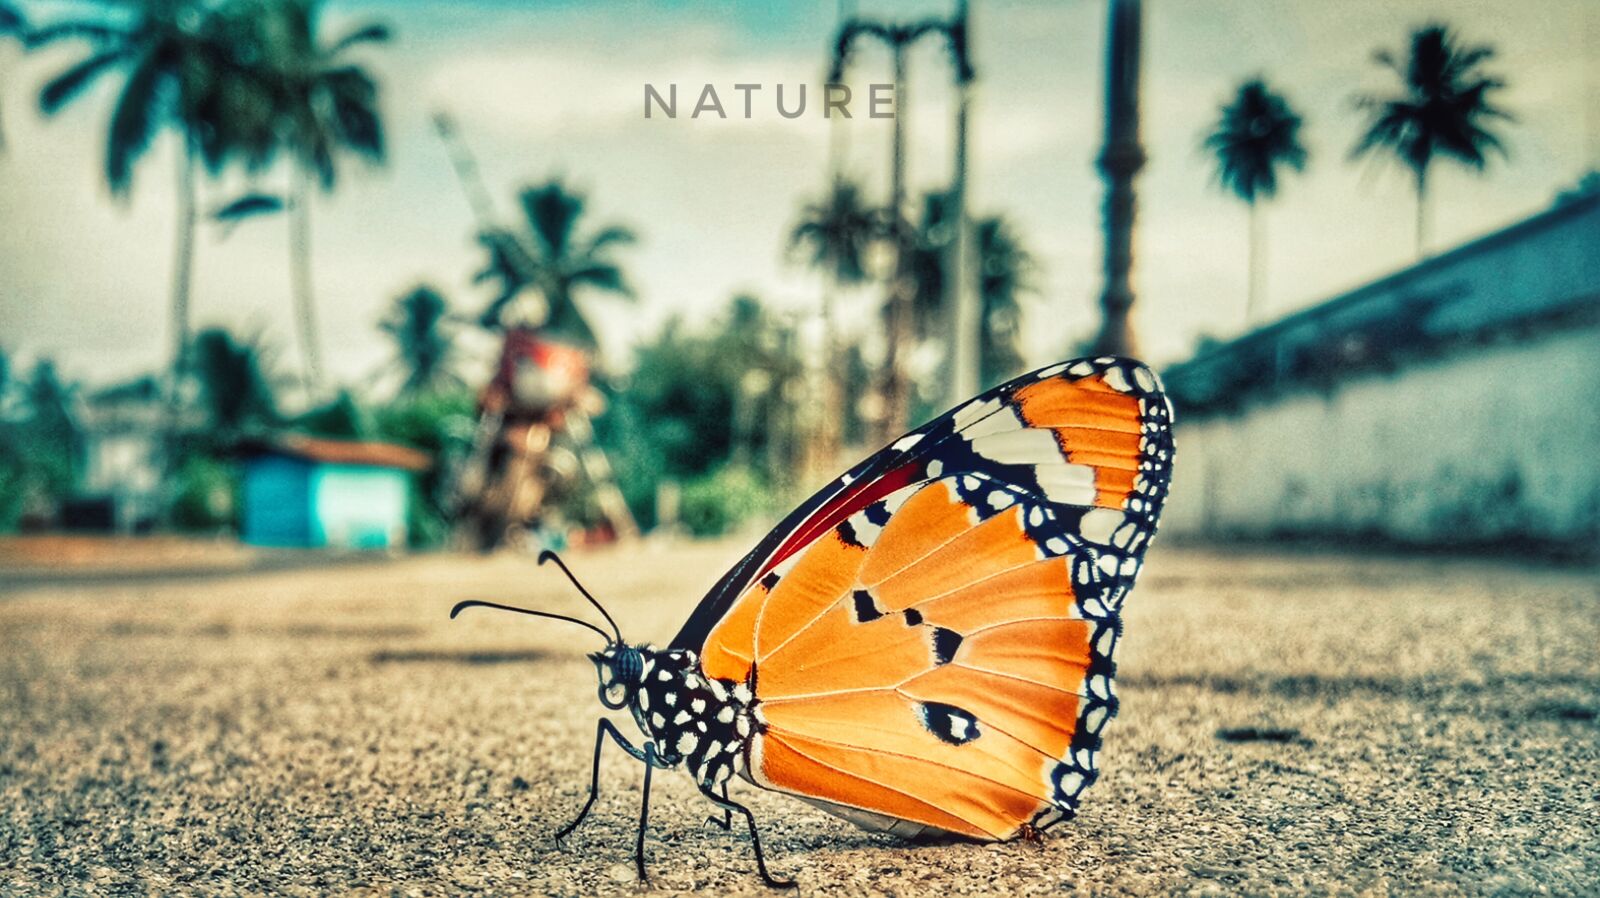 vivo 1609 sample photo. Butterfly, nature, insect photography